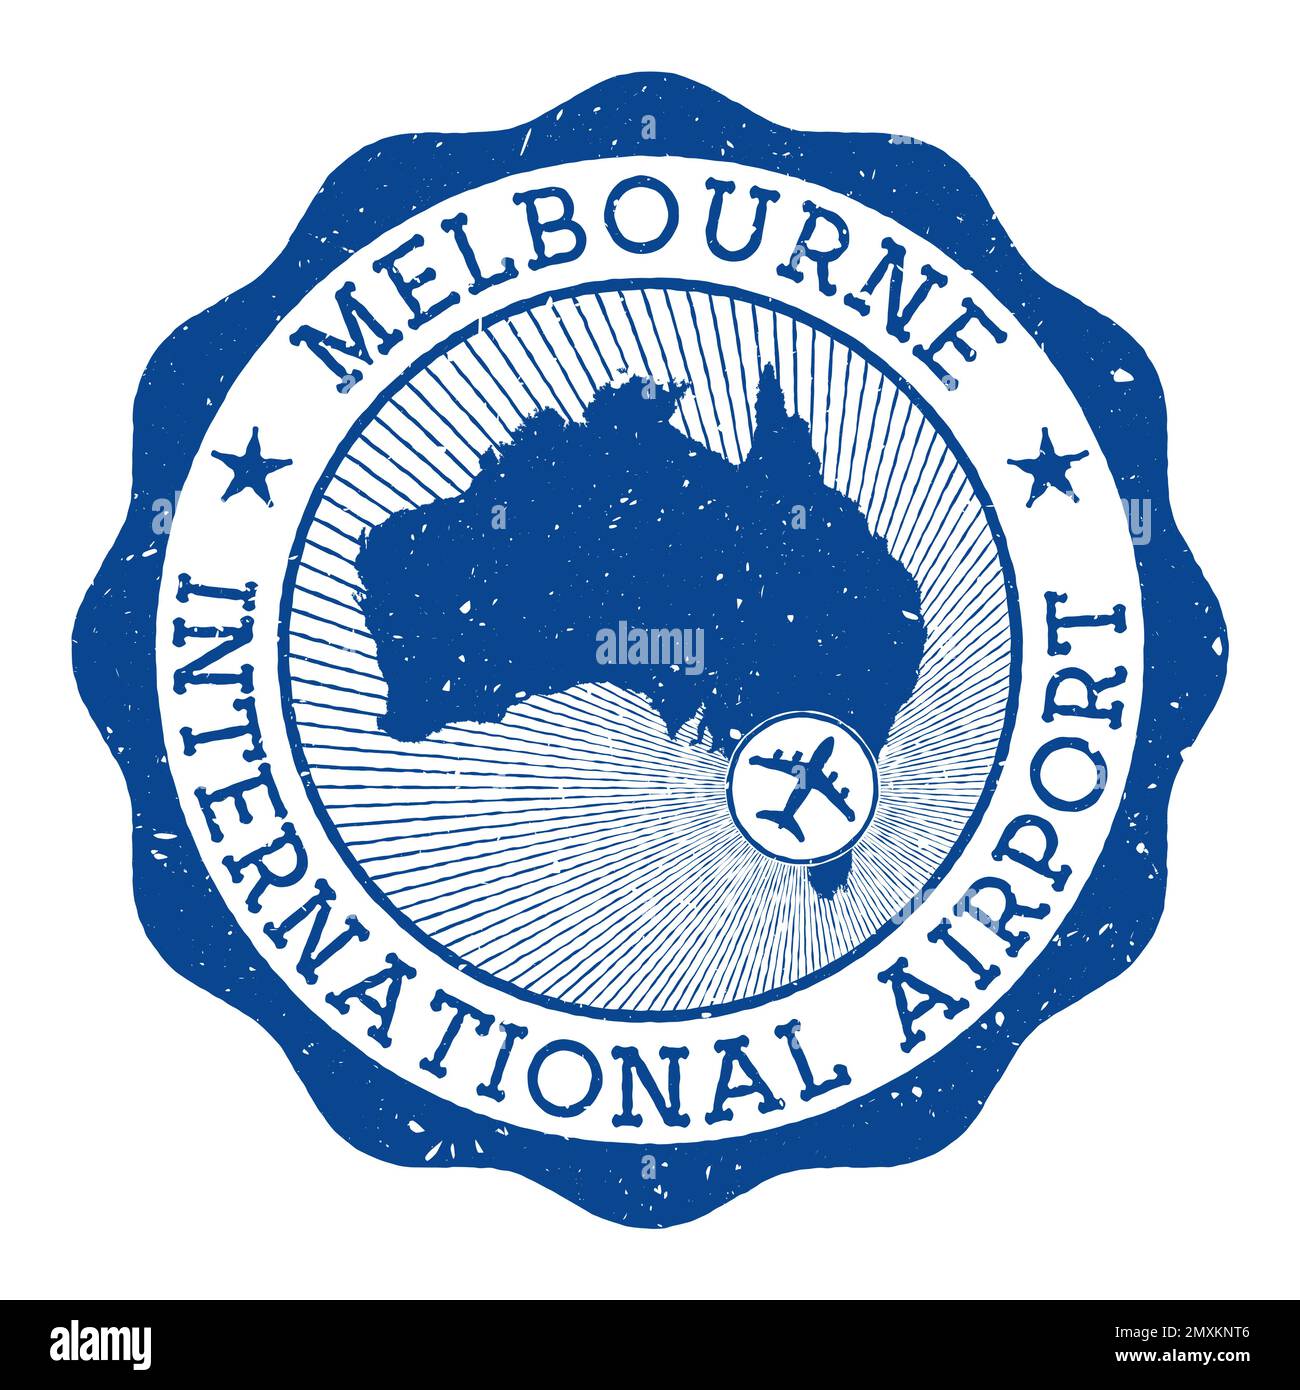 Melbourne International Airport stamp. Airport of Melbourne round logo with location on Australia map marked by airplane. Vector illustration. Stock Vector